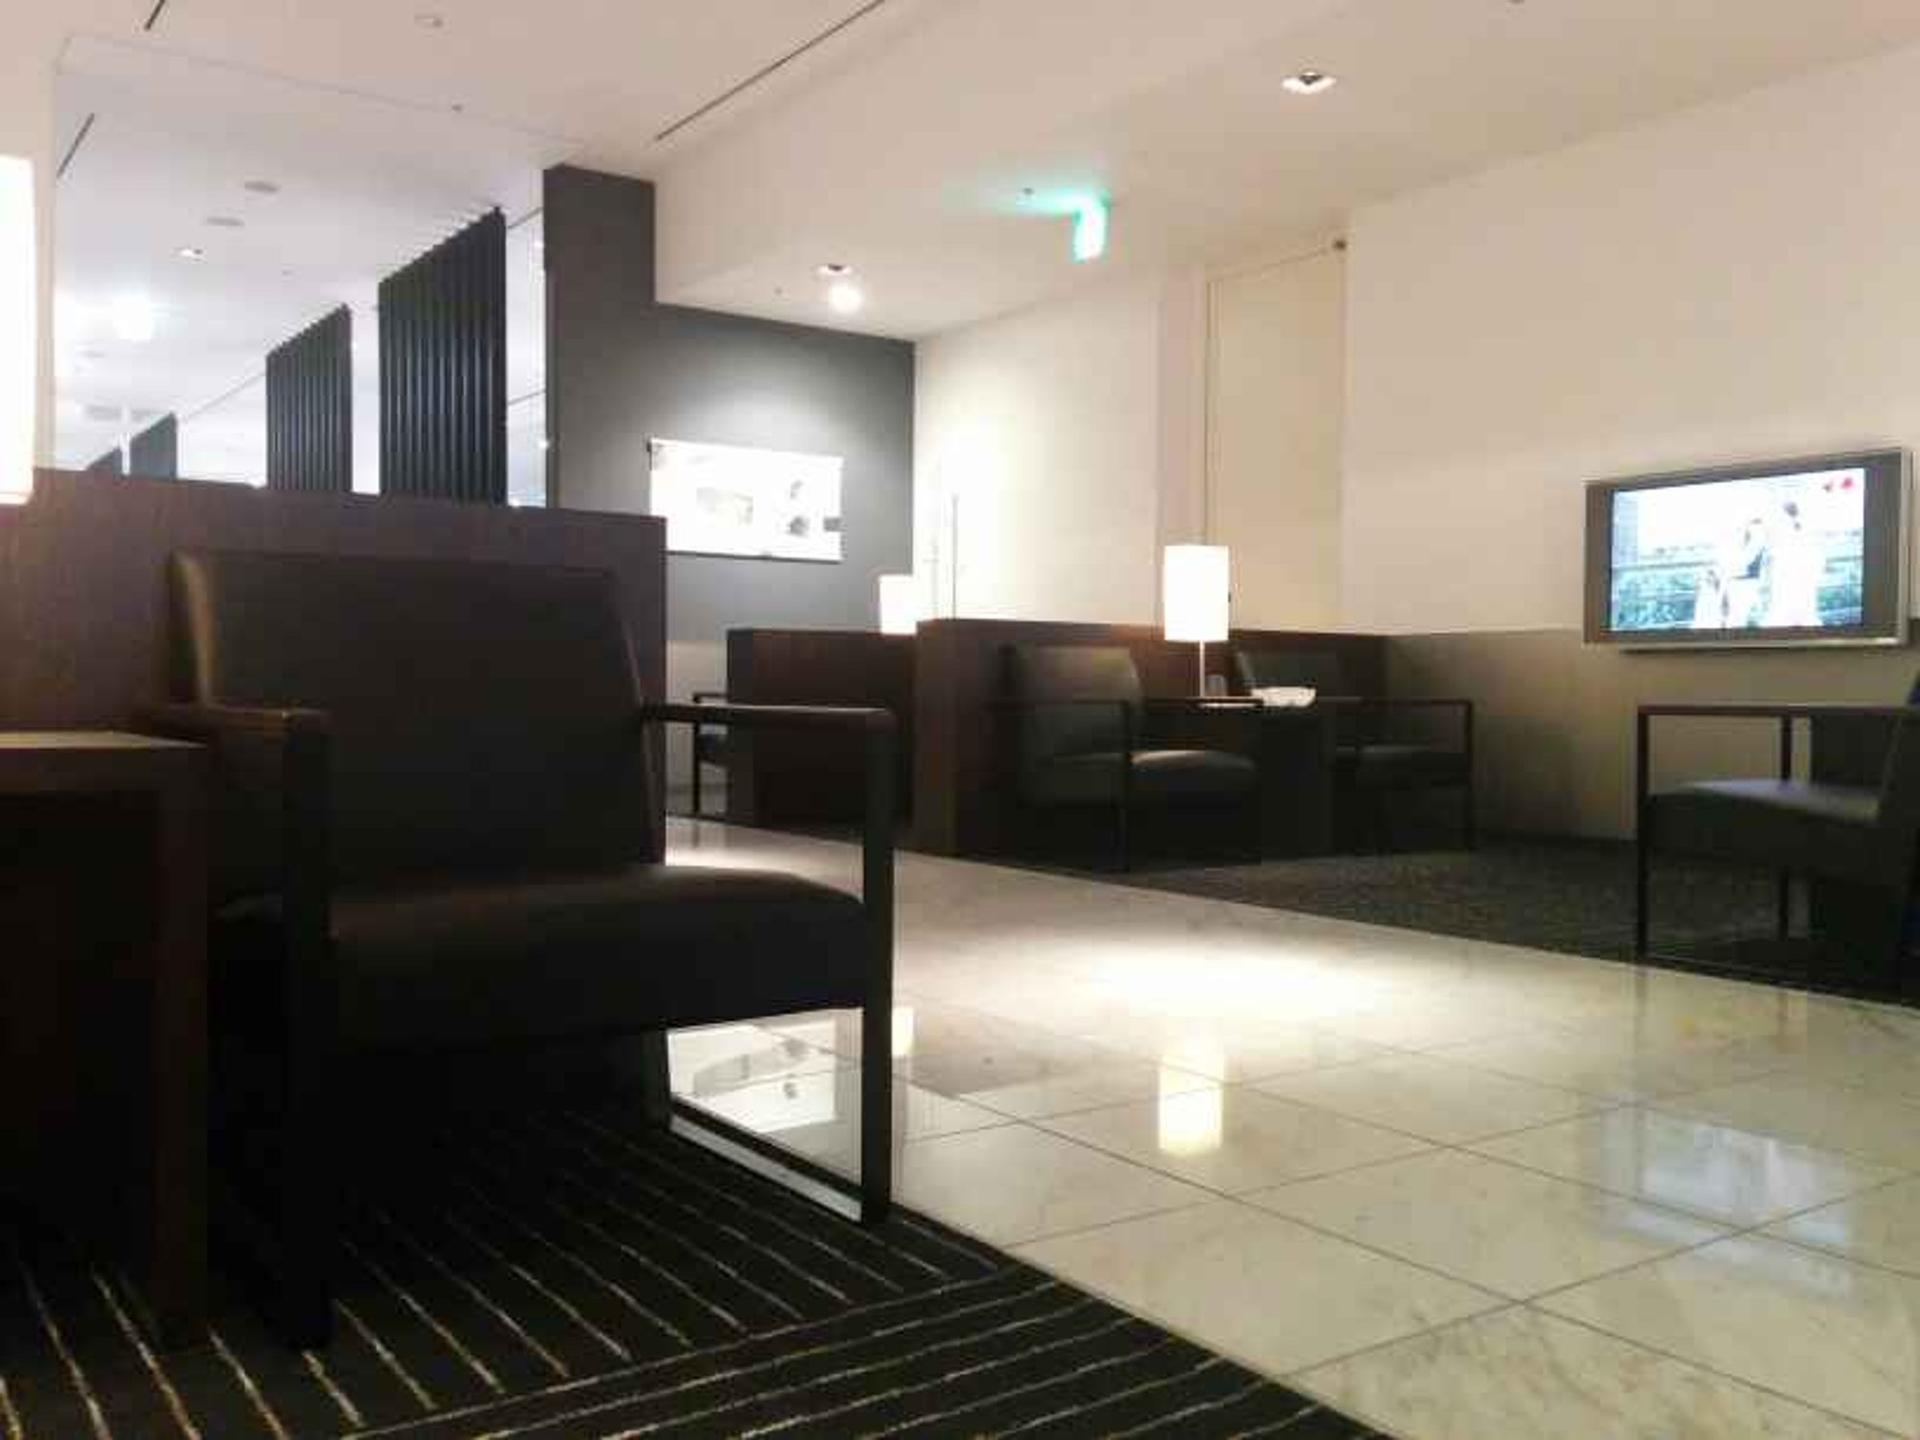 All Nippon Airways ANA Lounge image 5 of 39